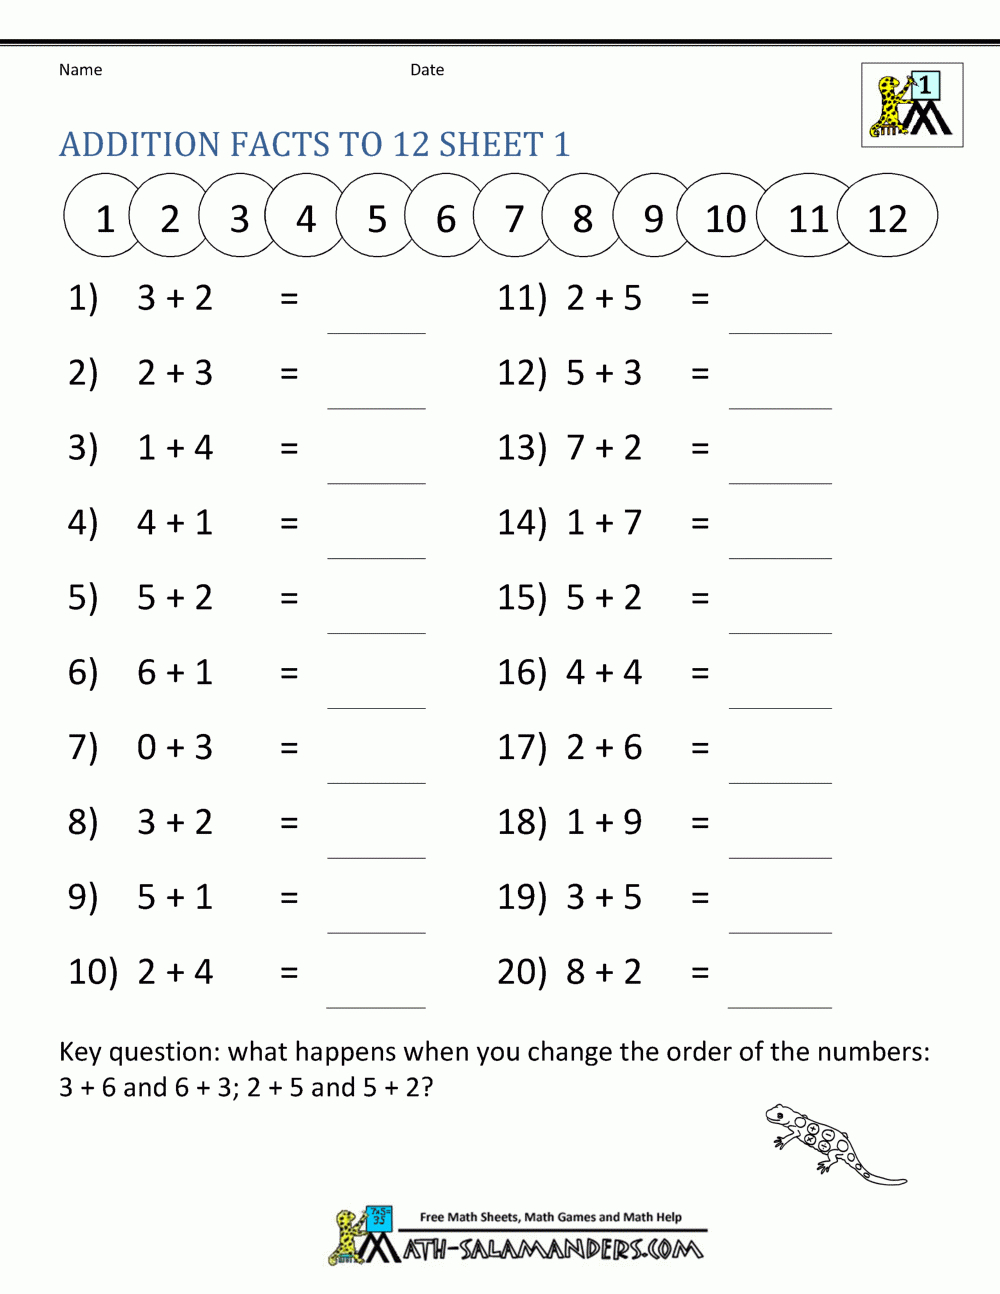 Addition Facts To 20 Worksheets pertaining to Free Printable Addition Worksheets For 1St Grade